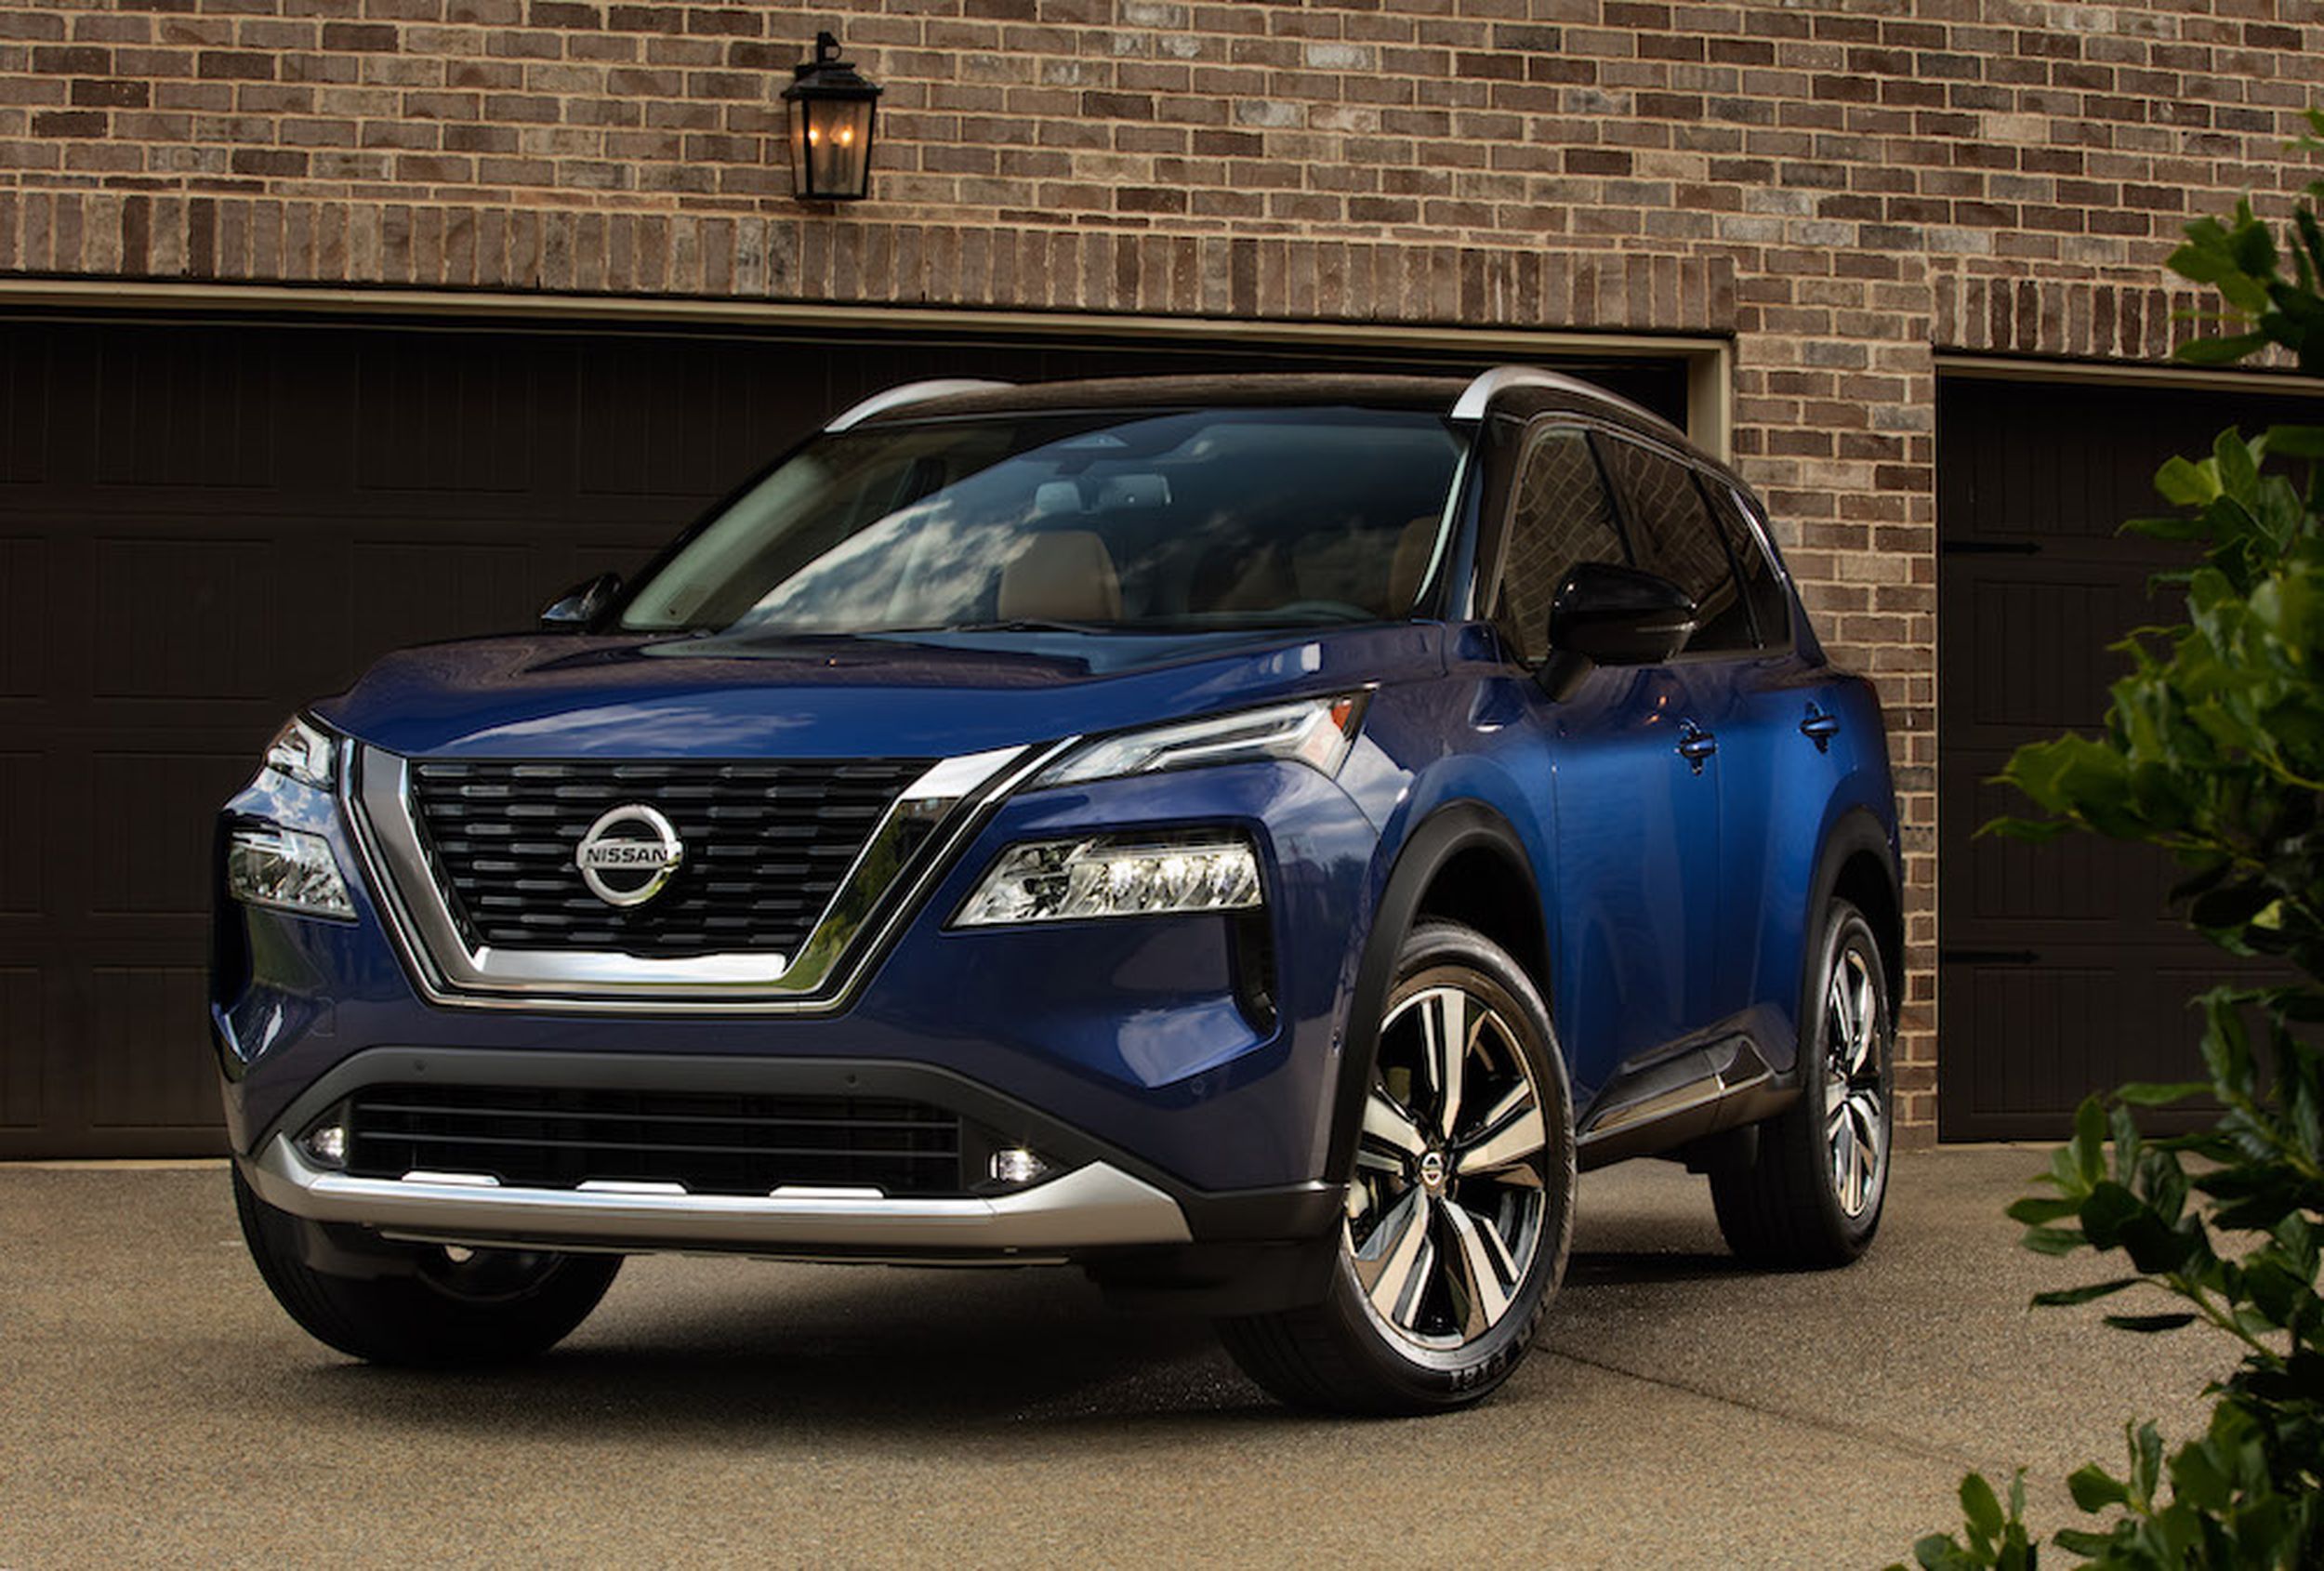 2021 Nissan Rogue driven, 's sweet electric van and more